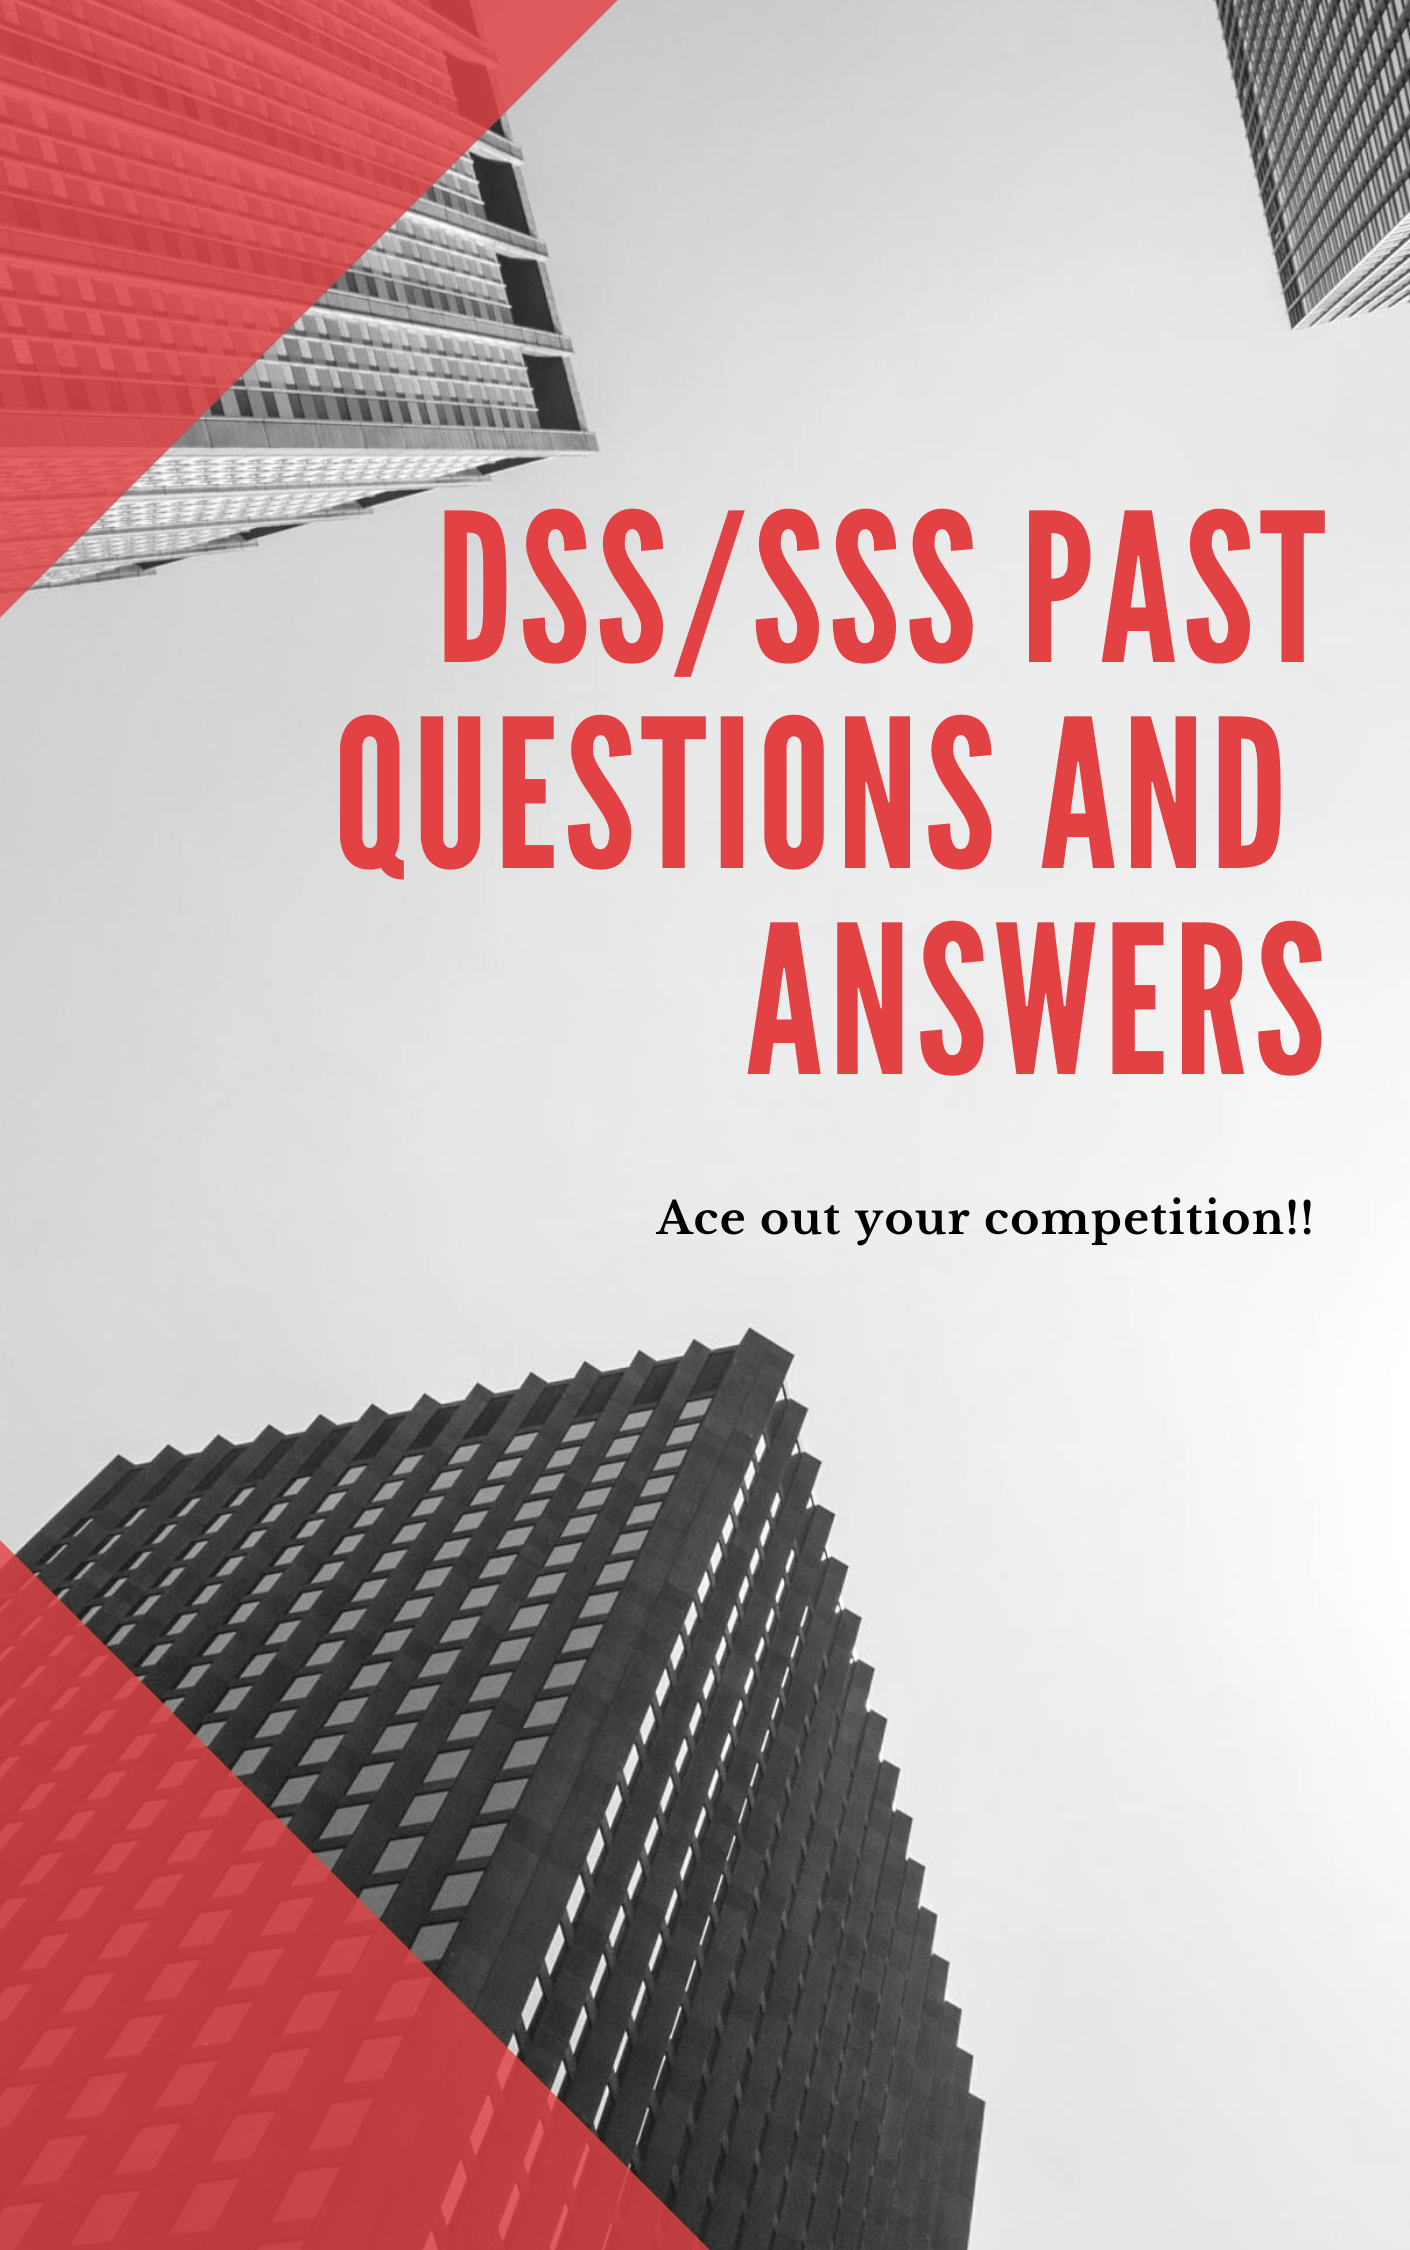 sss past questions and answers pdf cover page